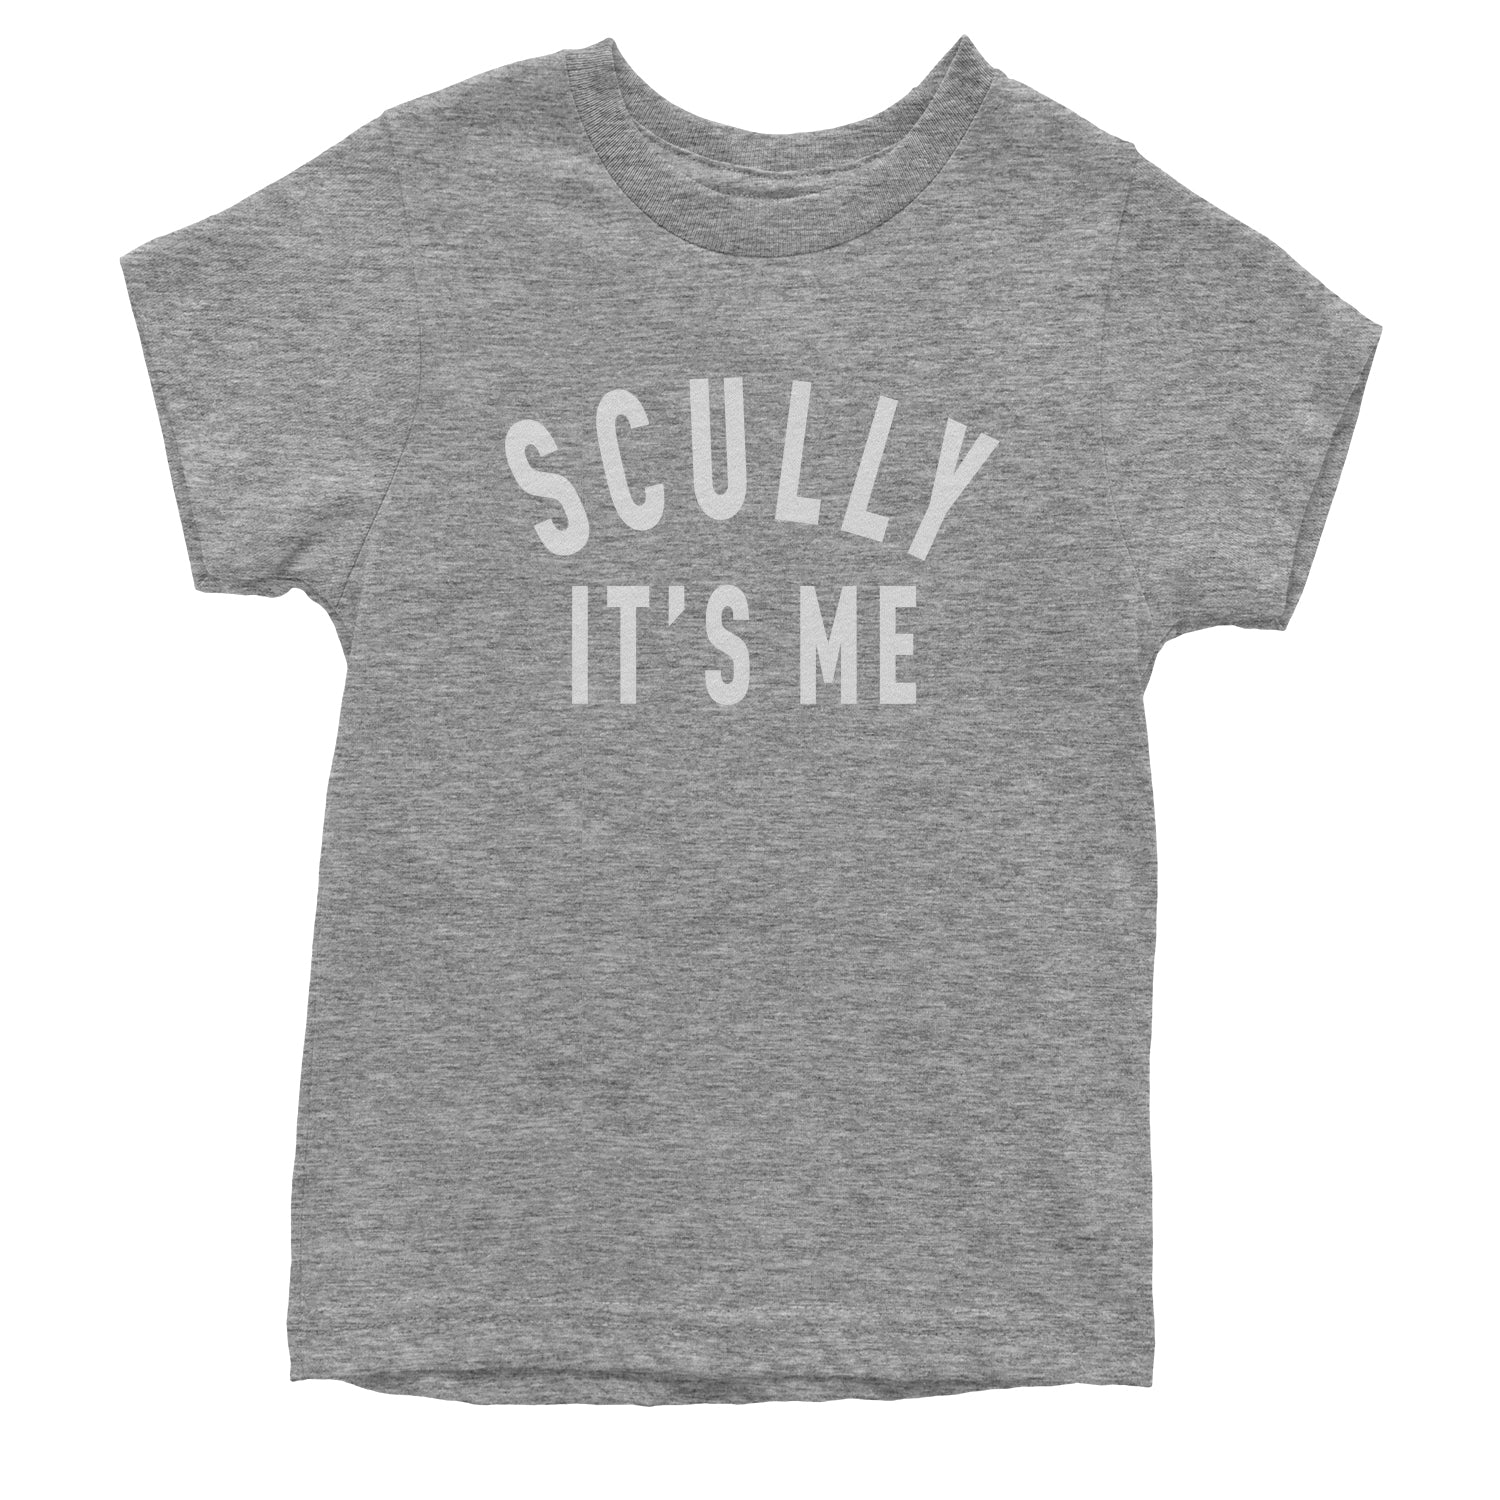 Scully, It's Me Youth T-shirt #expressiontees by Expression Tees